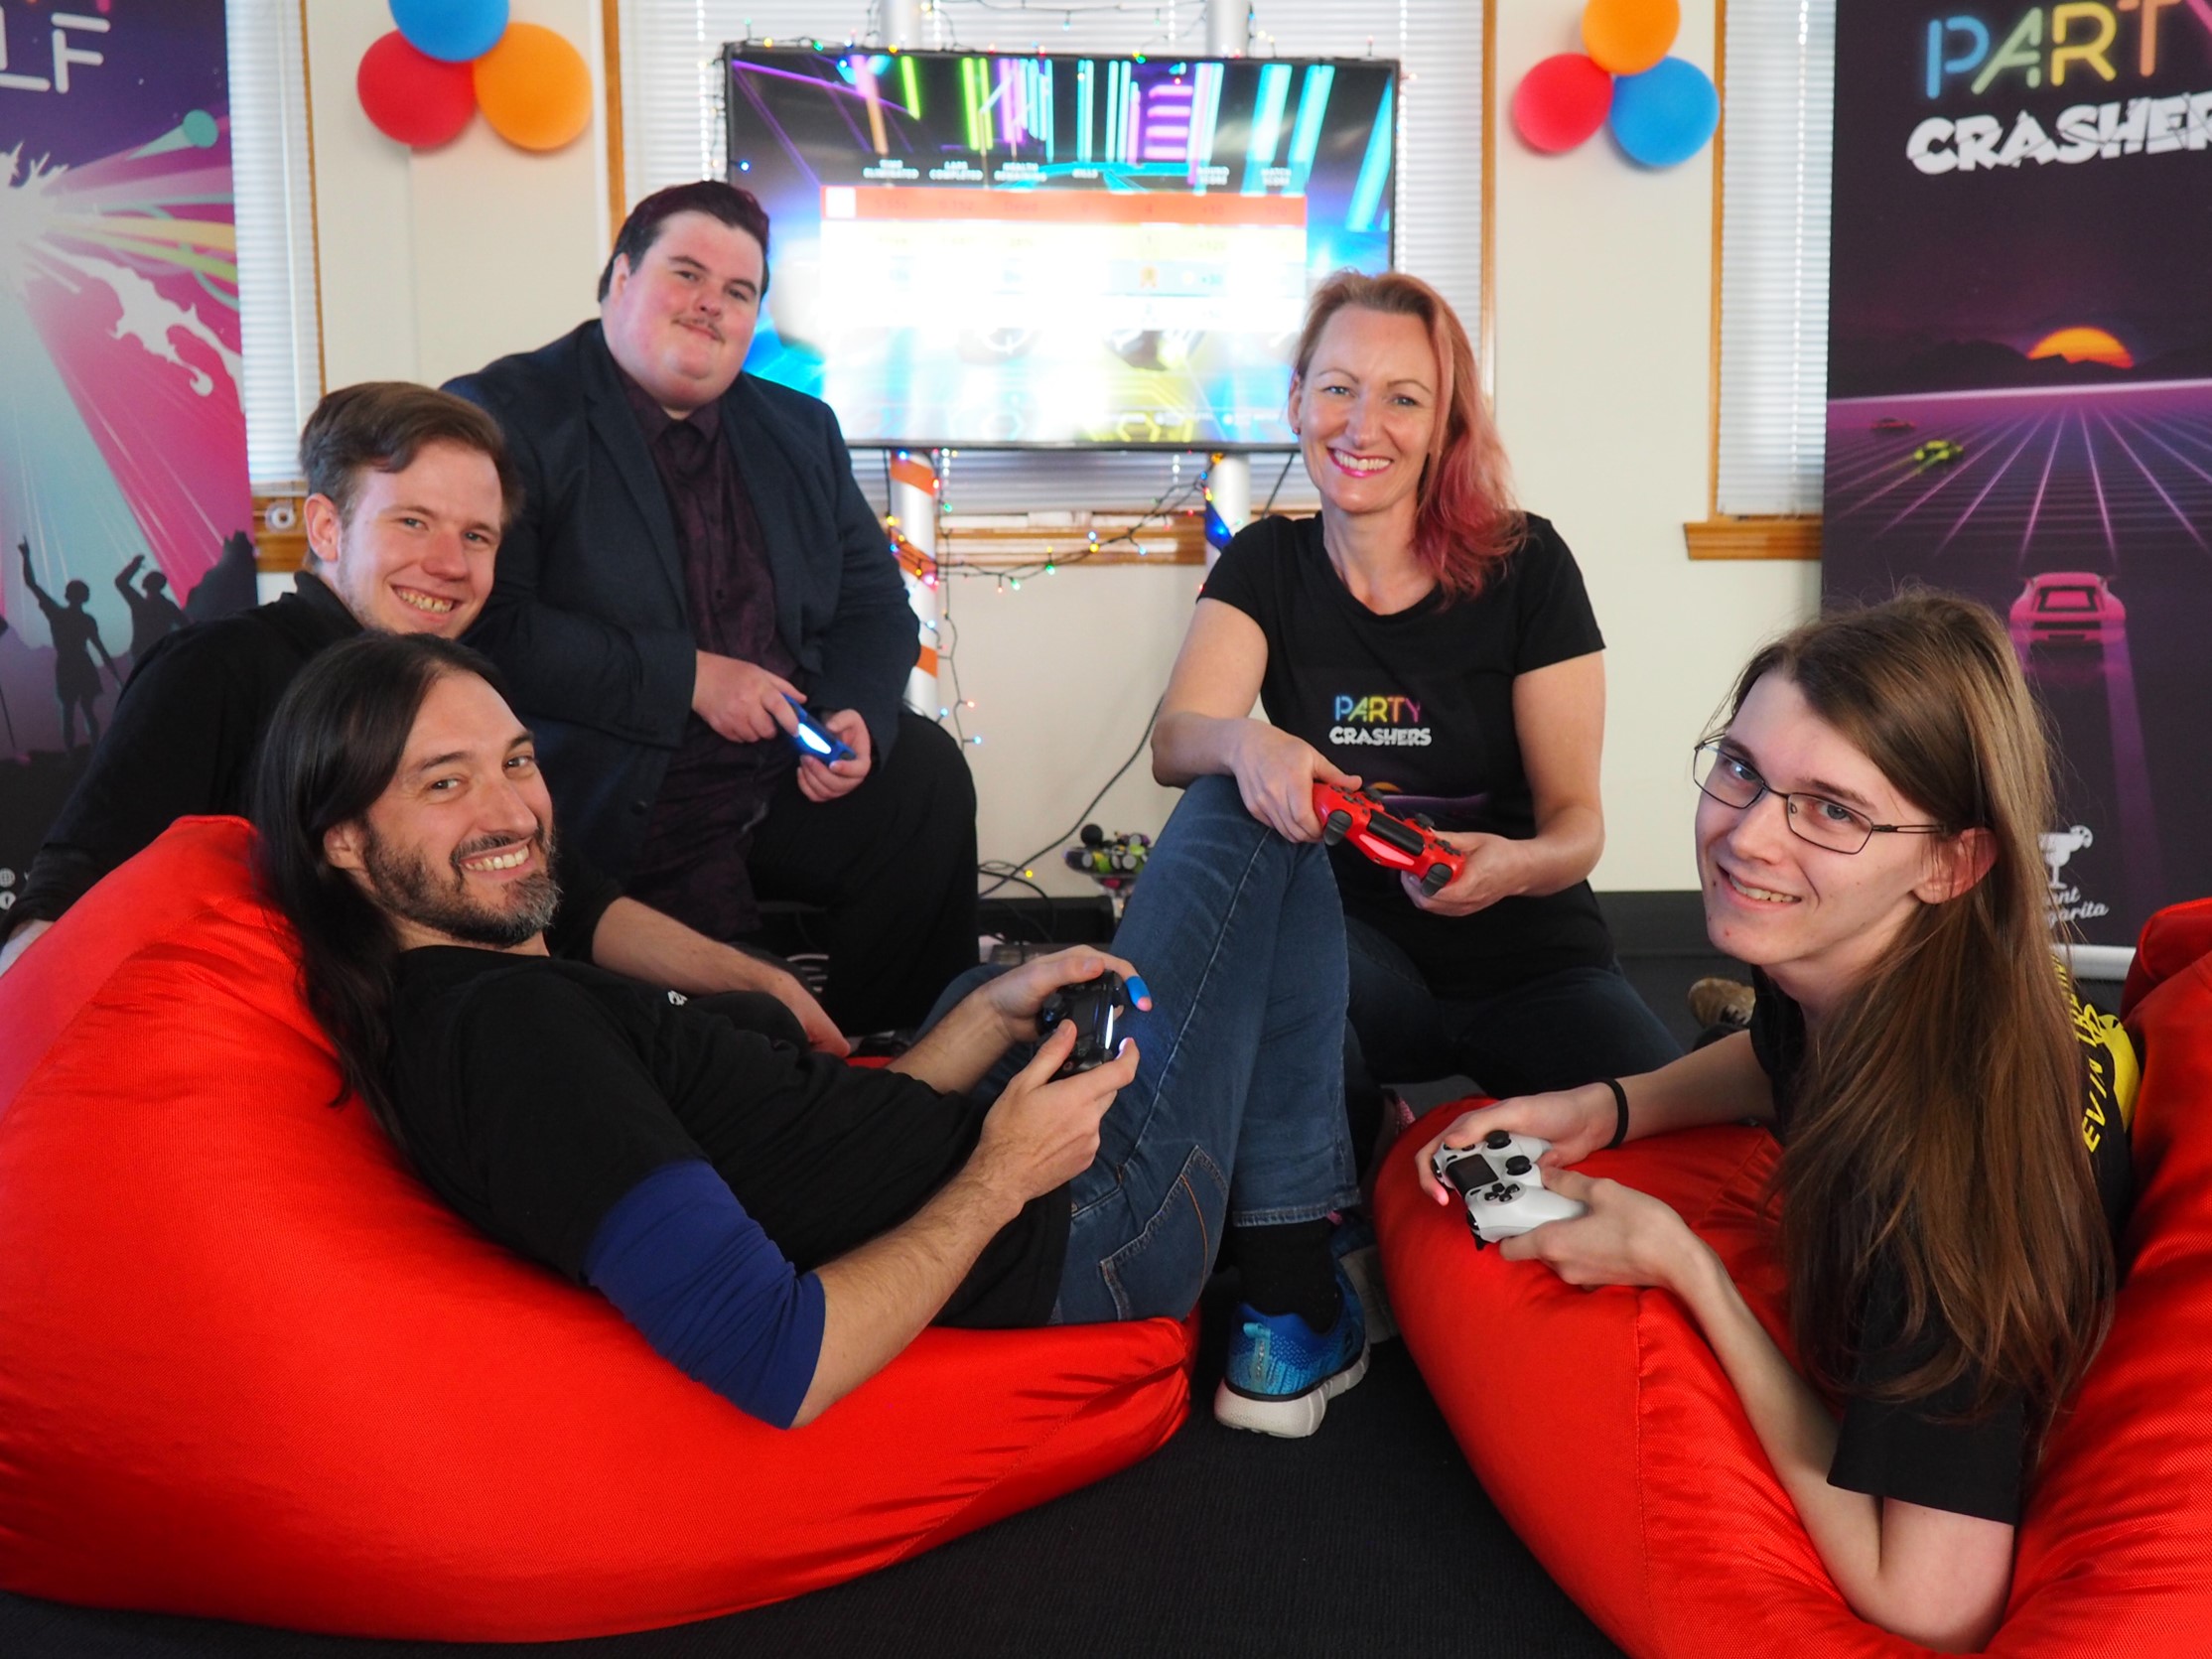 Members of the UTASPlay Group holding controllers playing Party Crashers